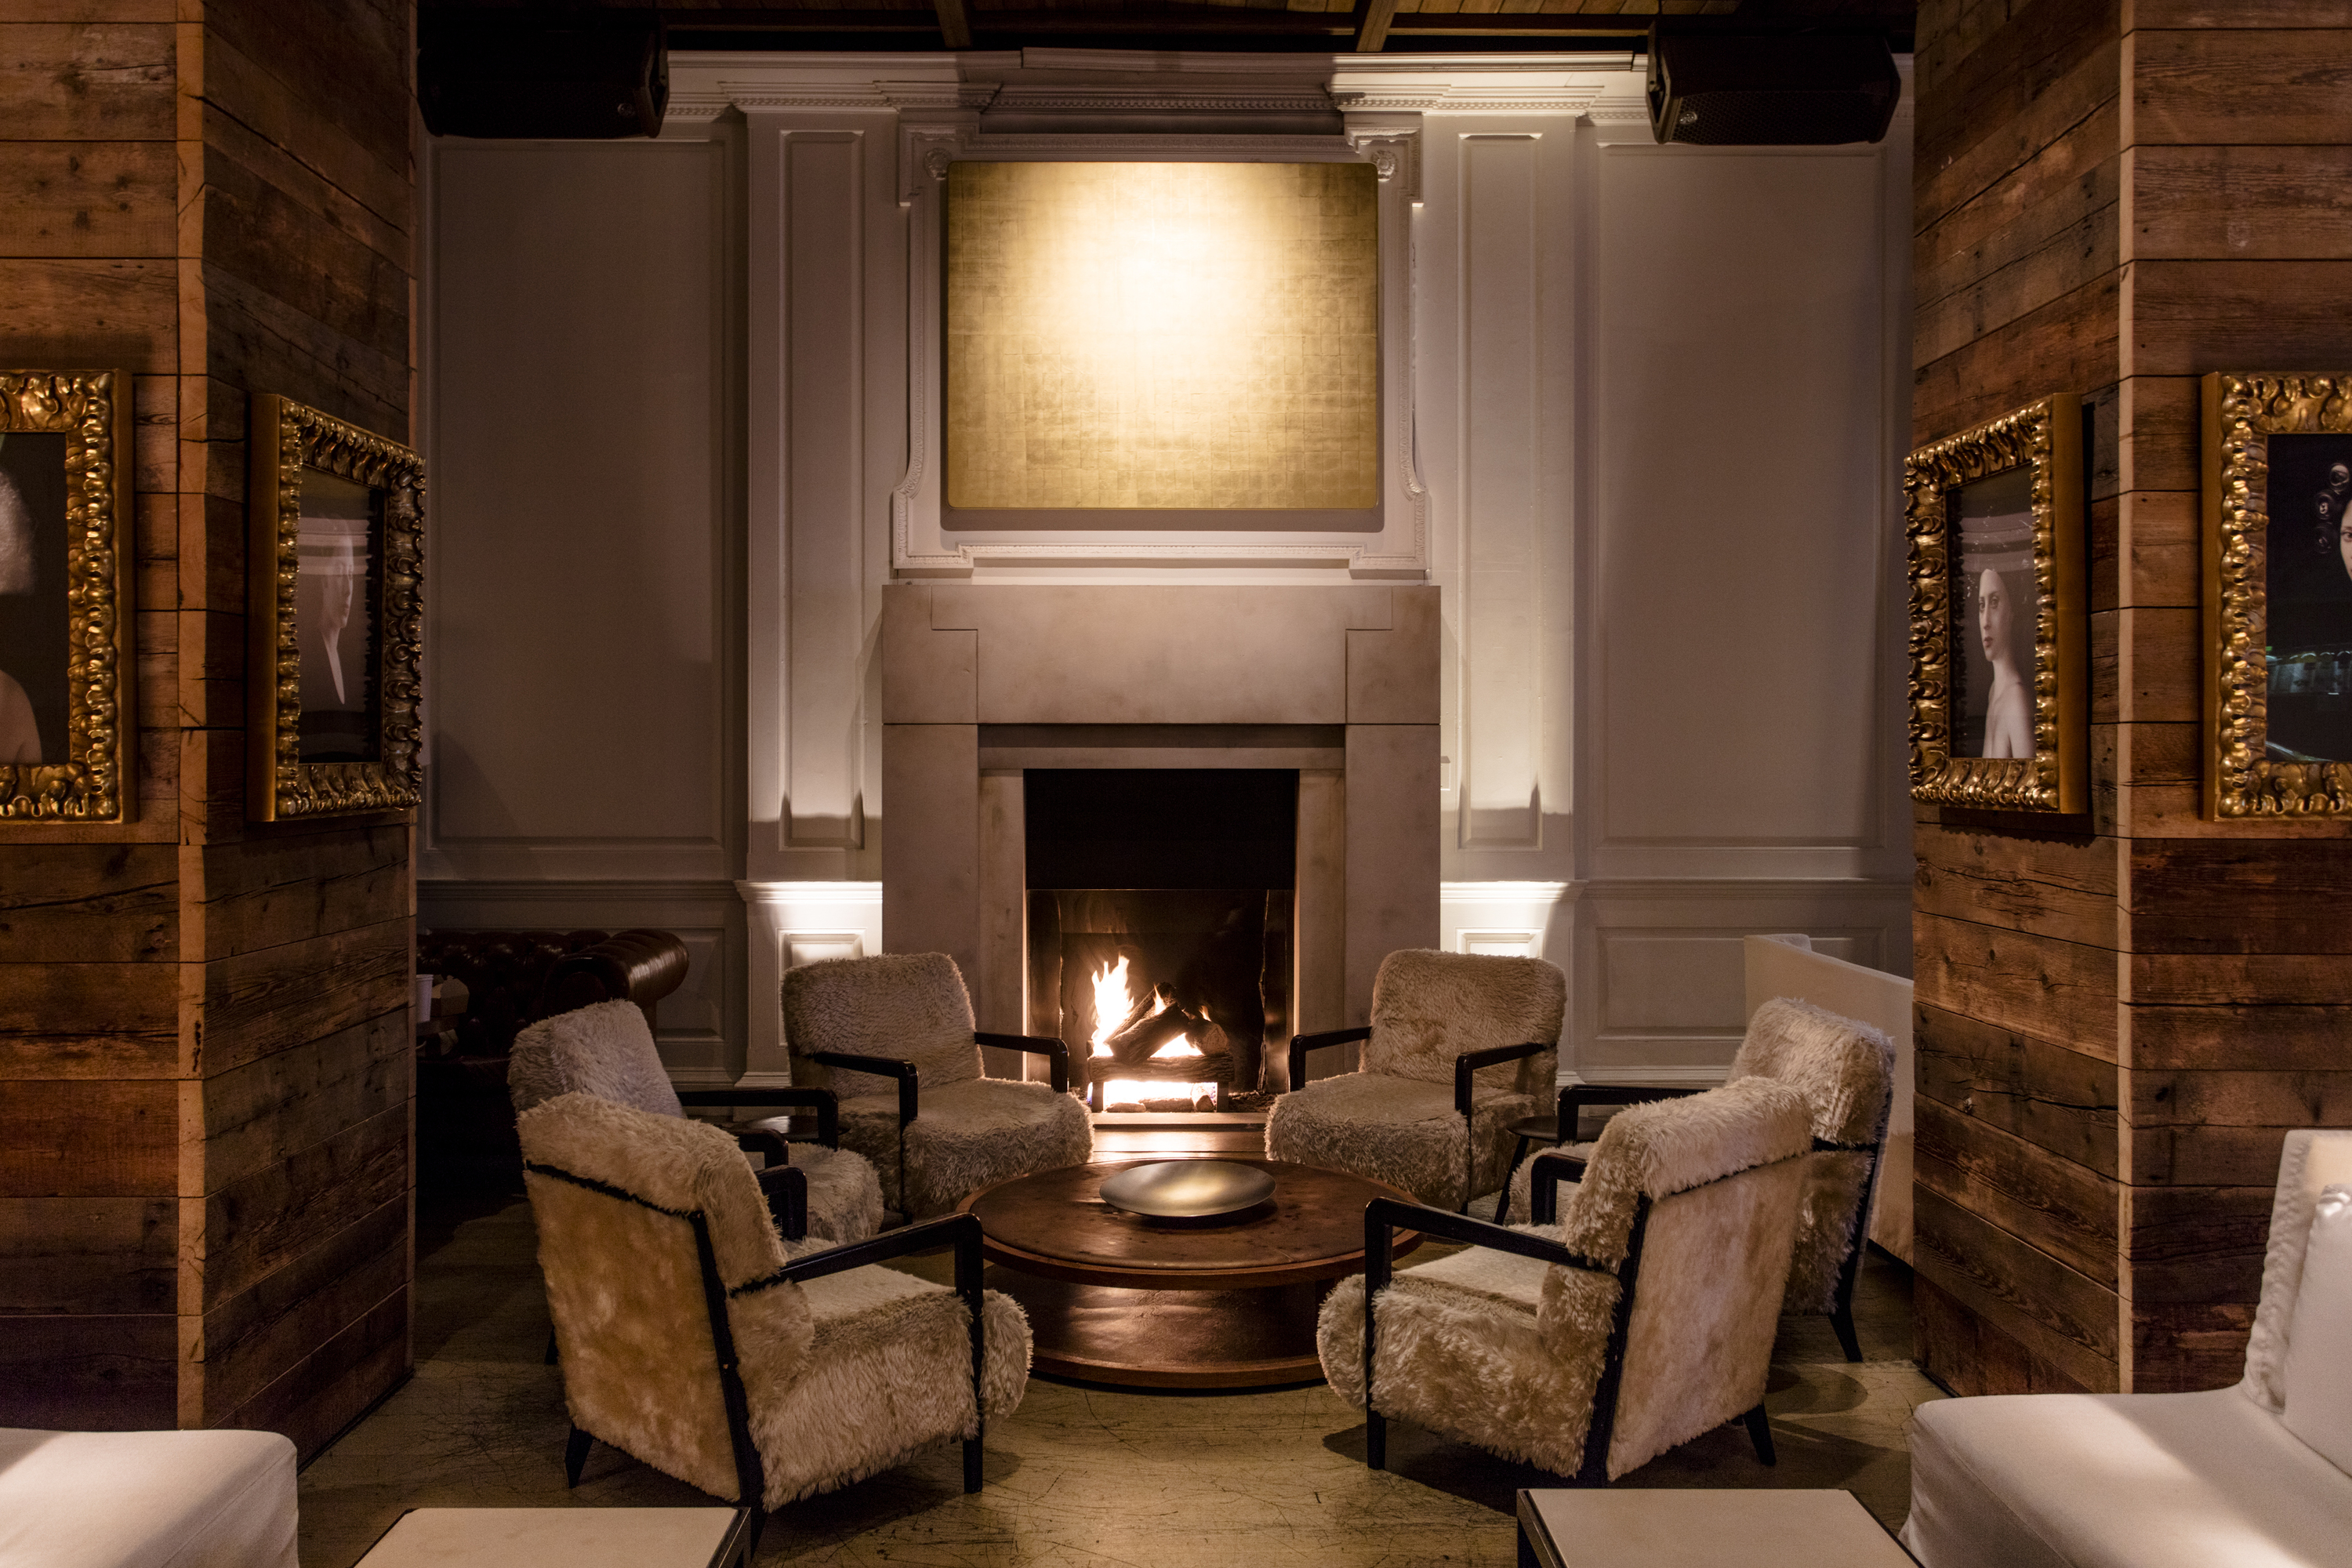 How to Arrange Furniture Around A Fireplace Beautiful Chicago Bars and Restaurants with Fireplaces 2019